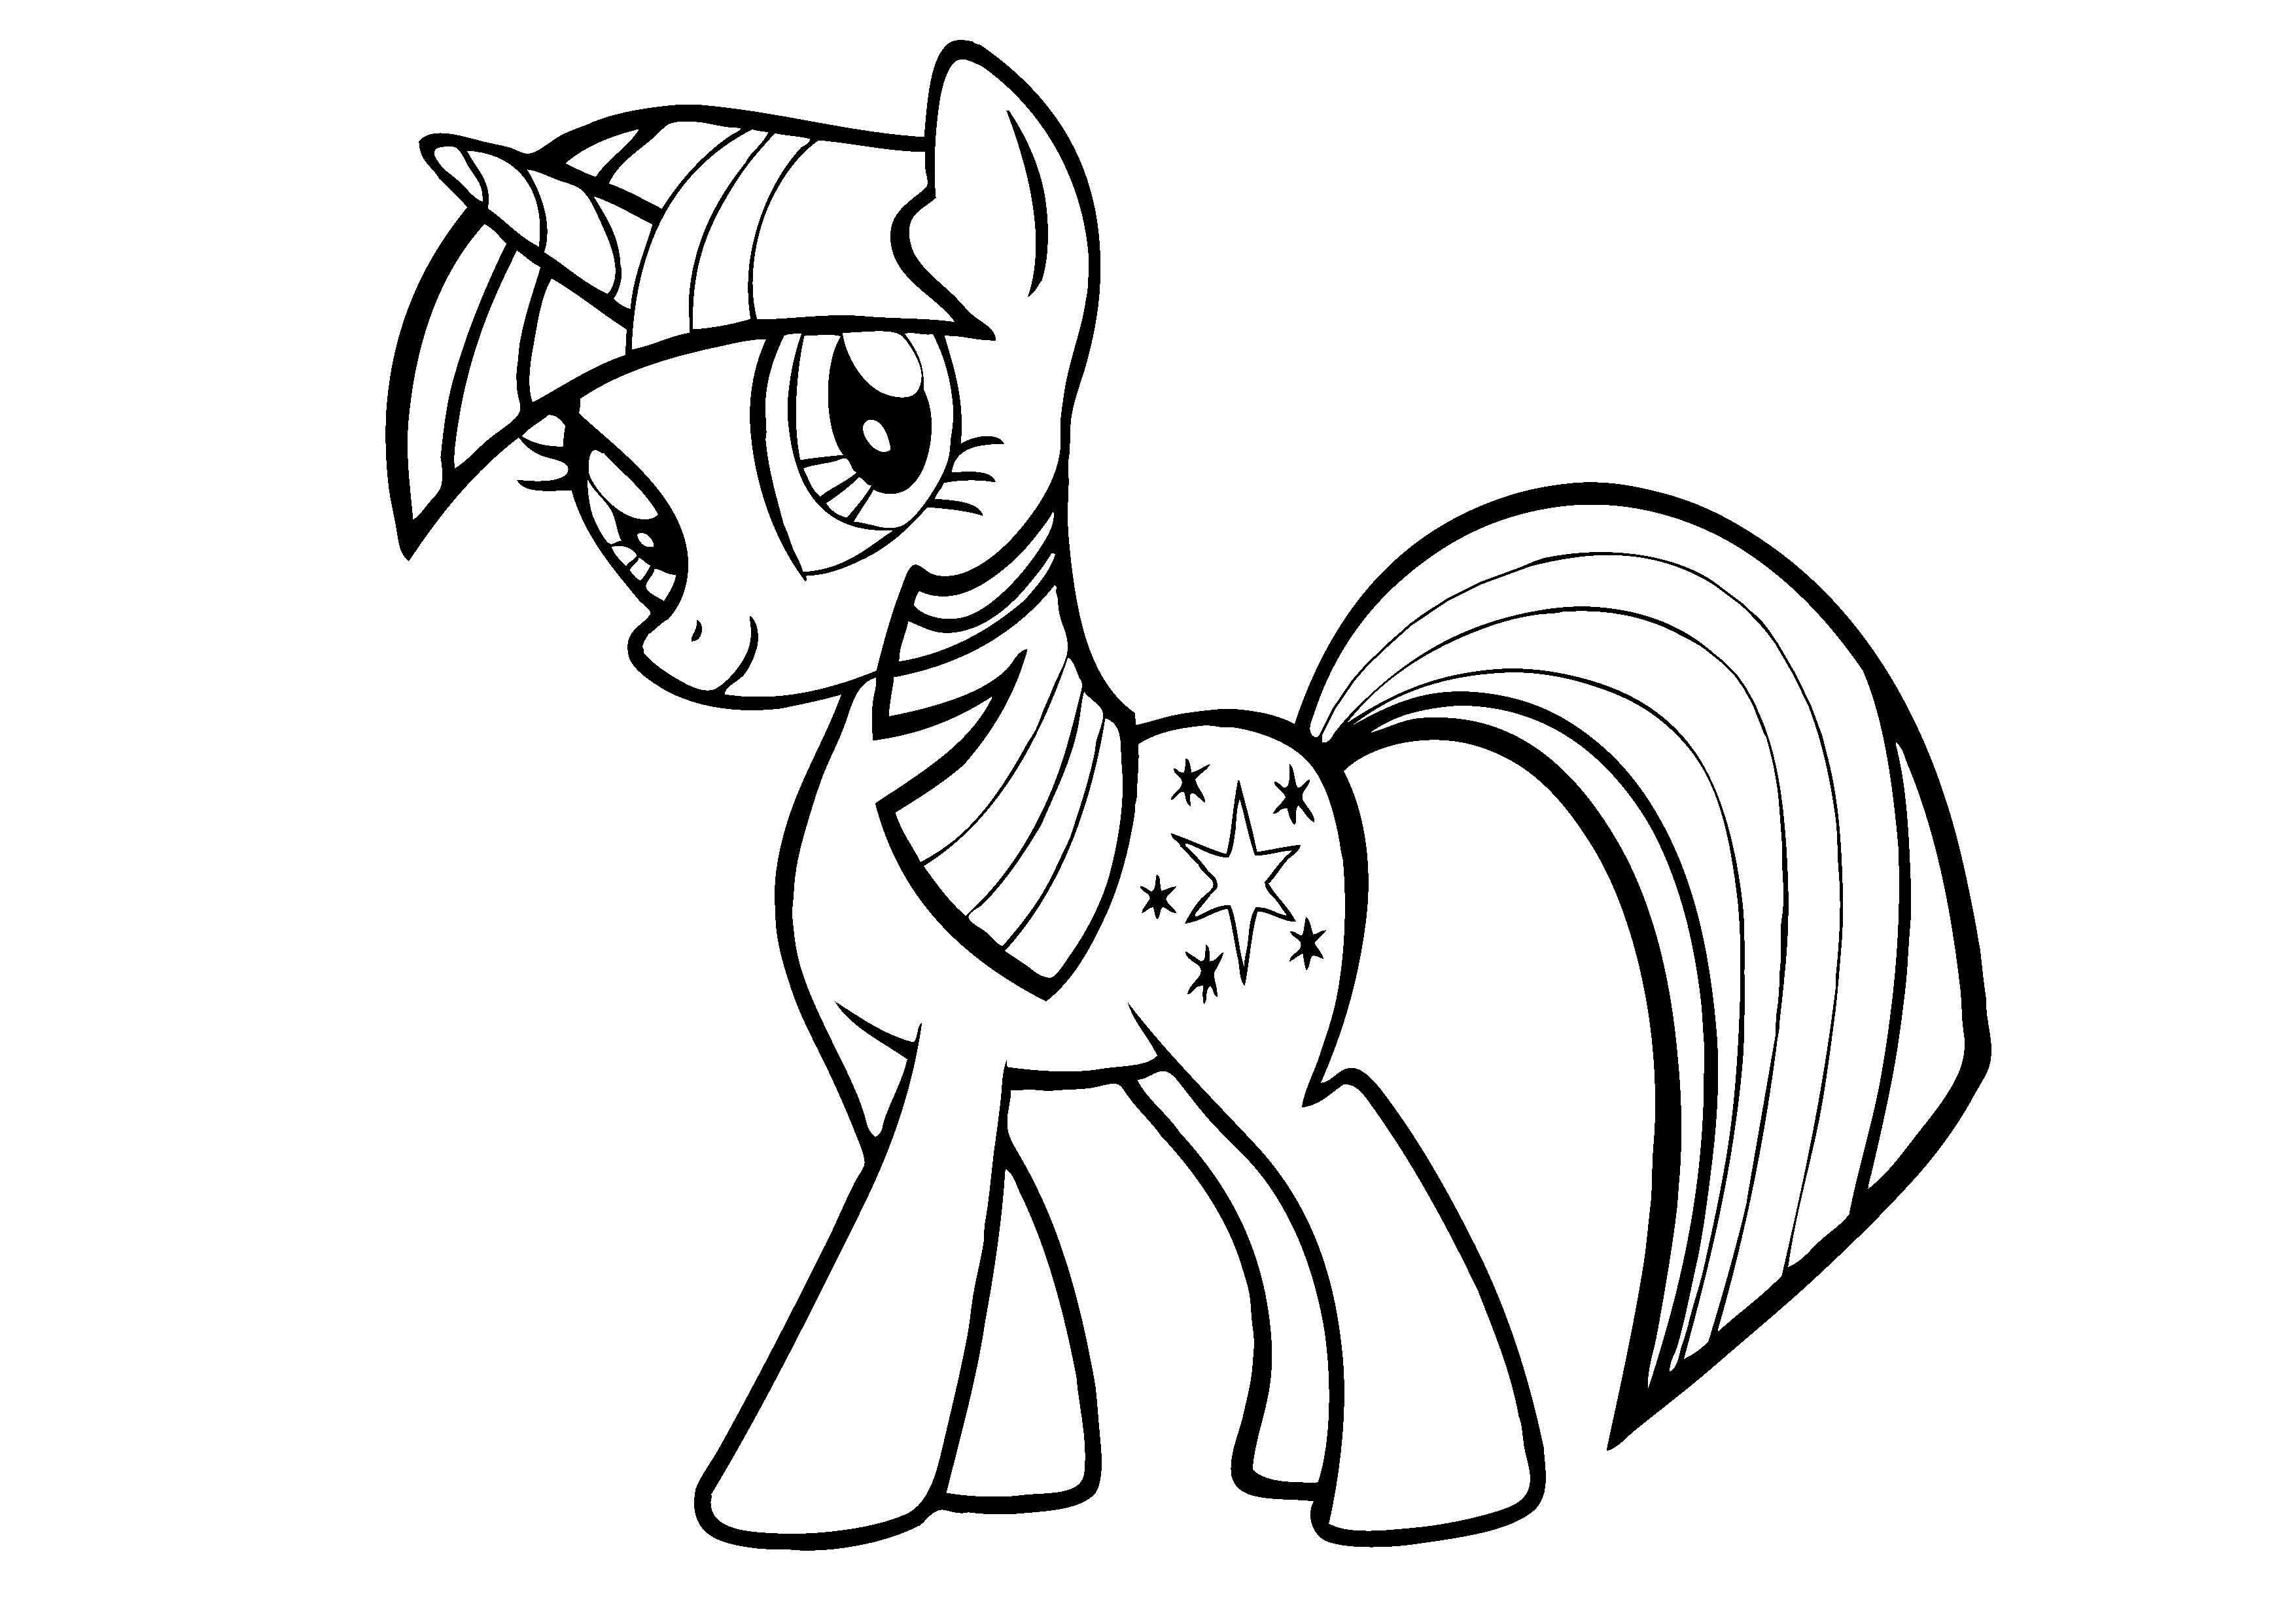 Free Printable My Little Pony Coloring Pages For Kids | Character - Free Printable My Little Pony Coloring Pages